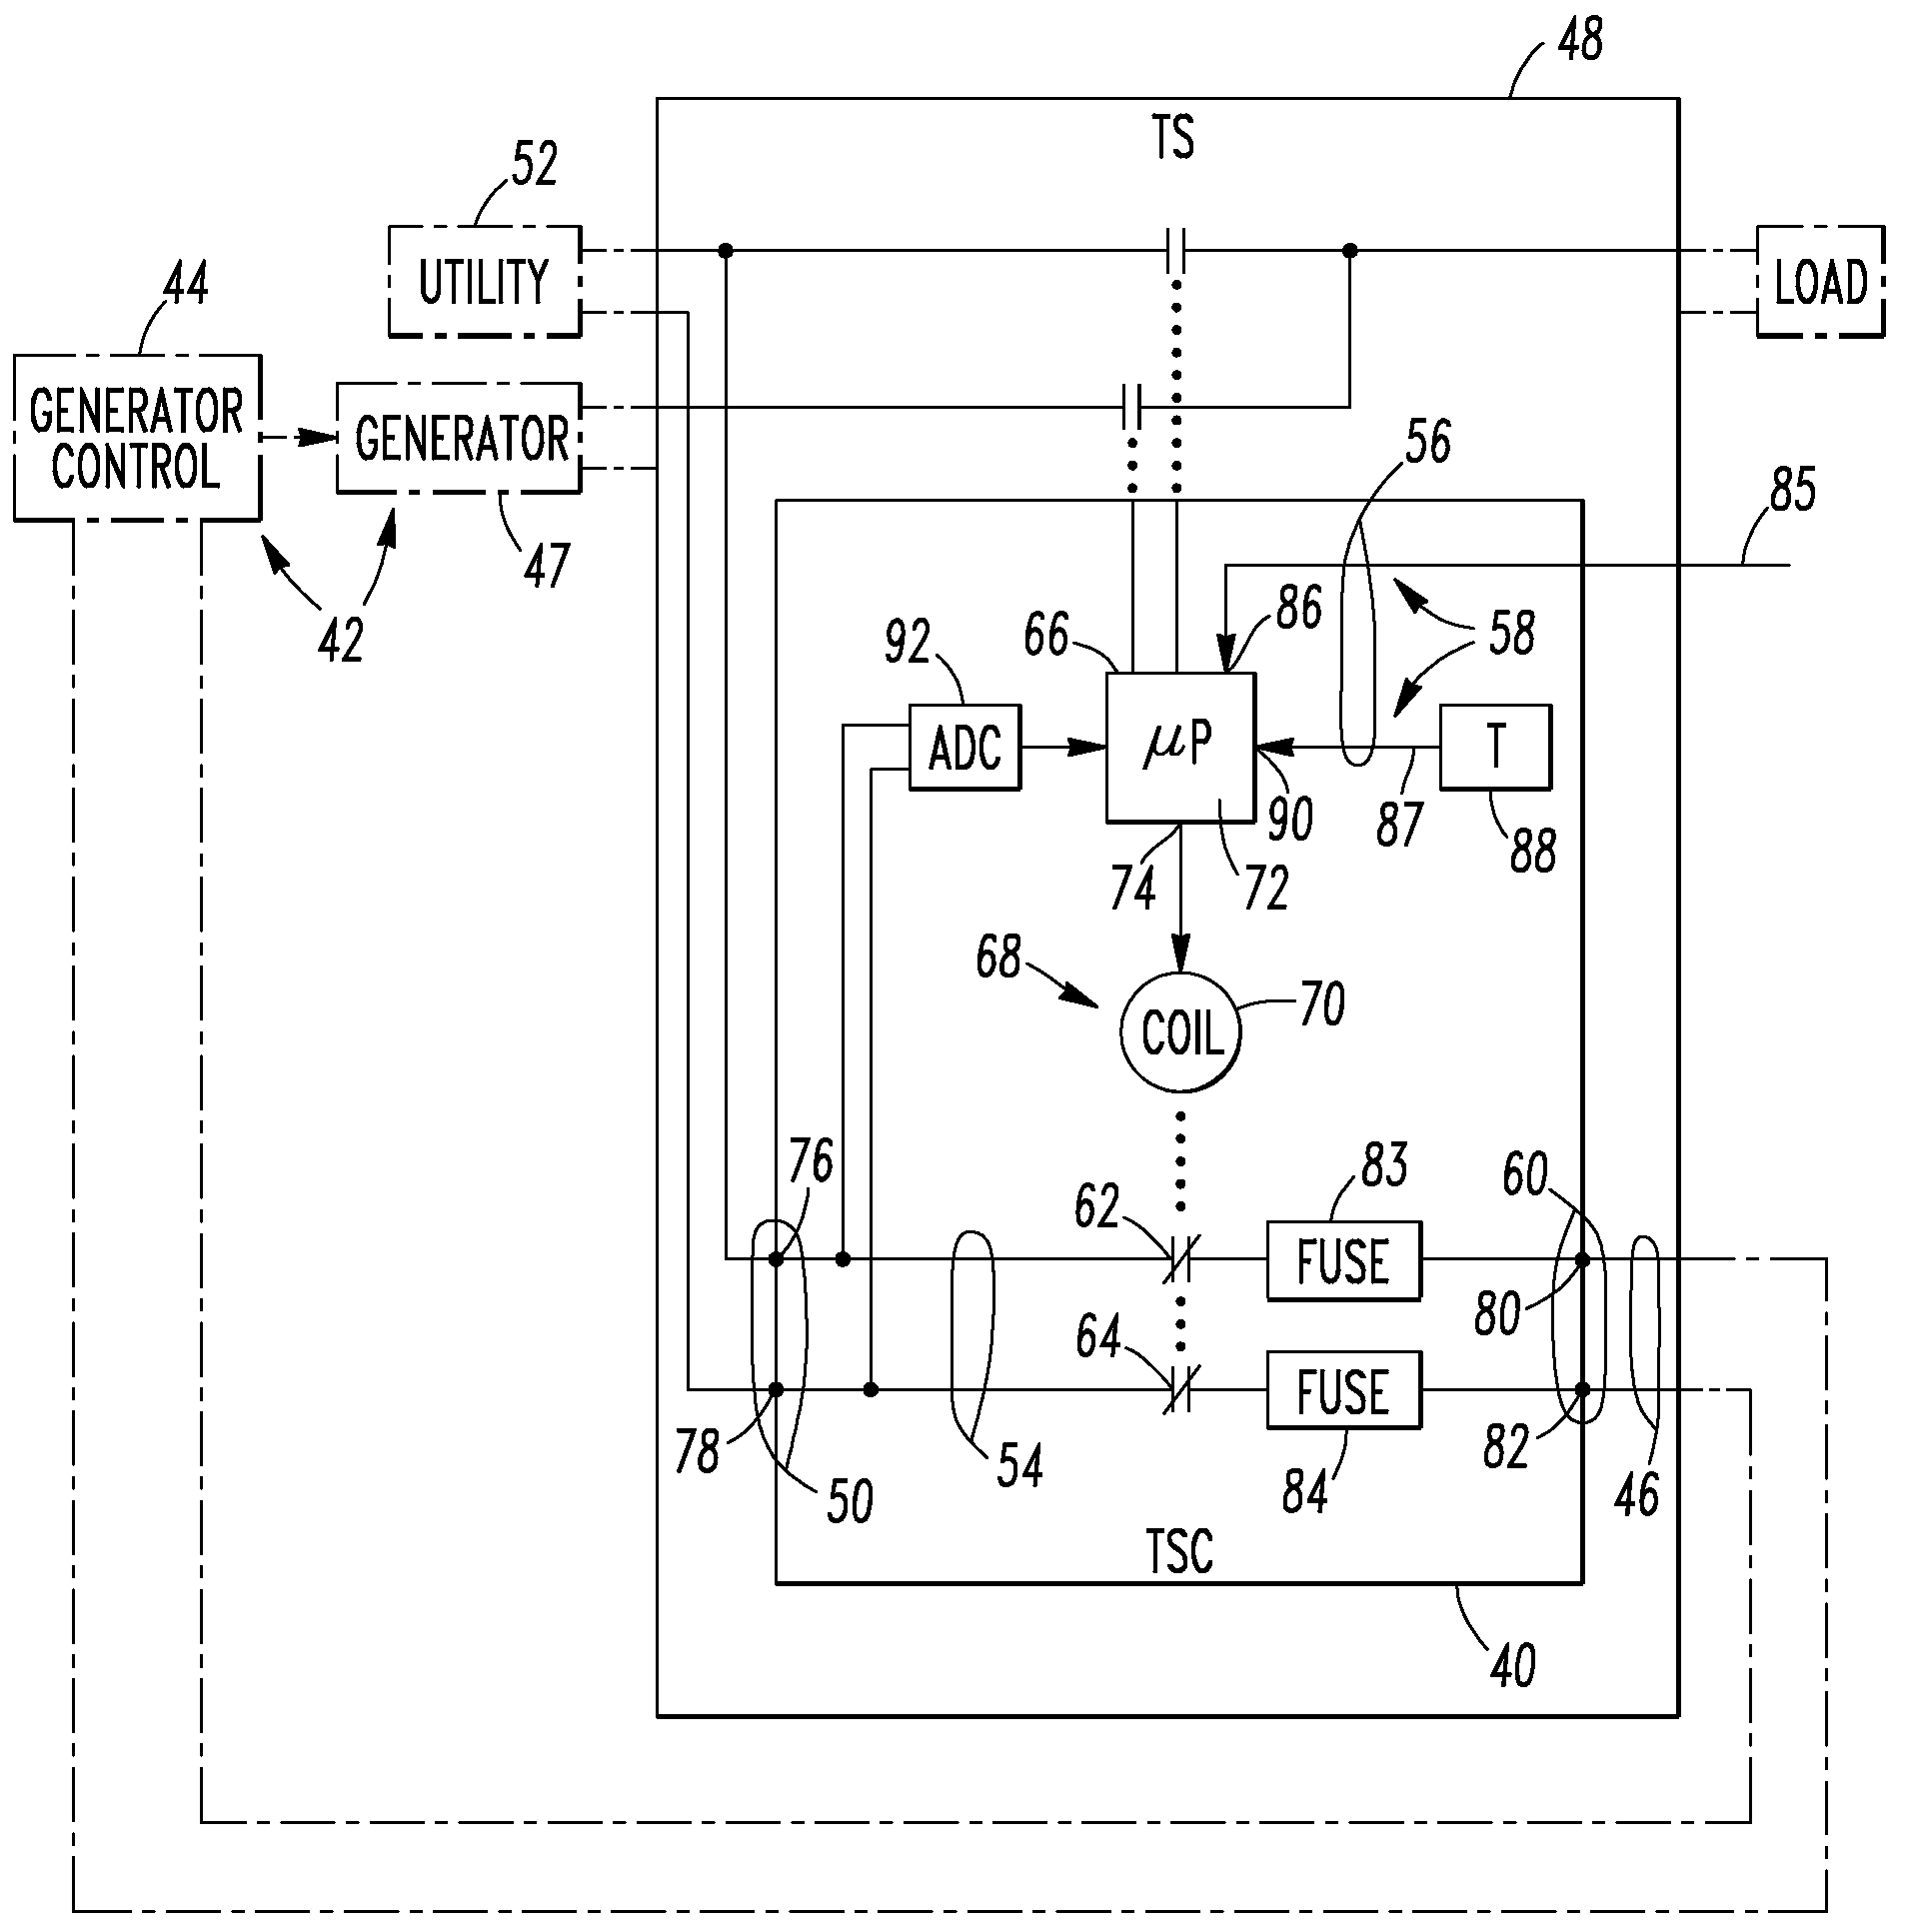 Transfer switch controller providing an alternating current voltage to a generator and transfer switch including the same